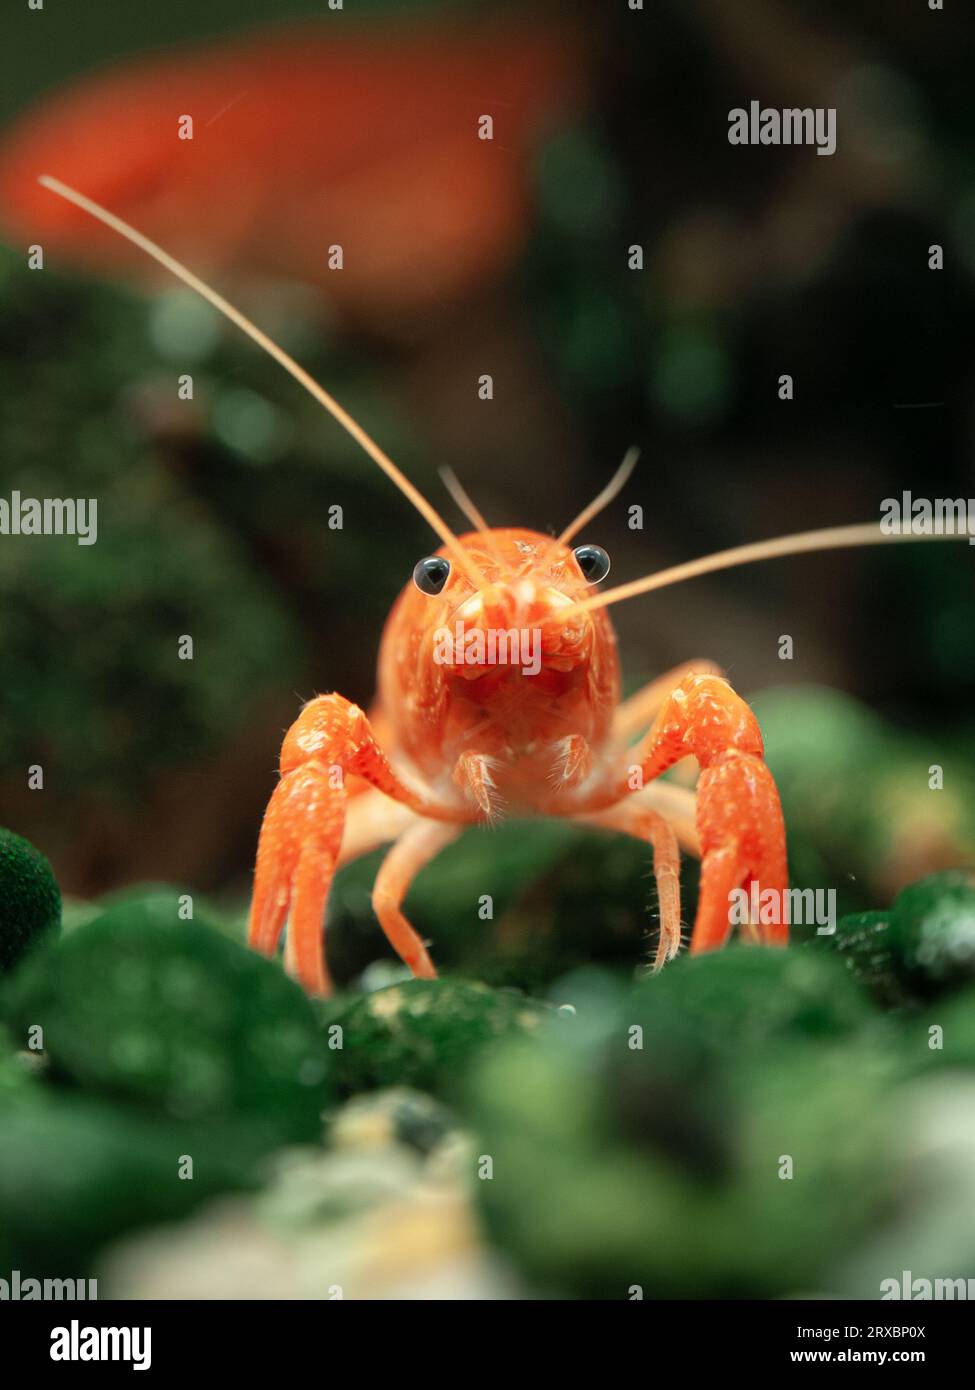 Small crab in the aquarium with green background Stock Photo